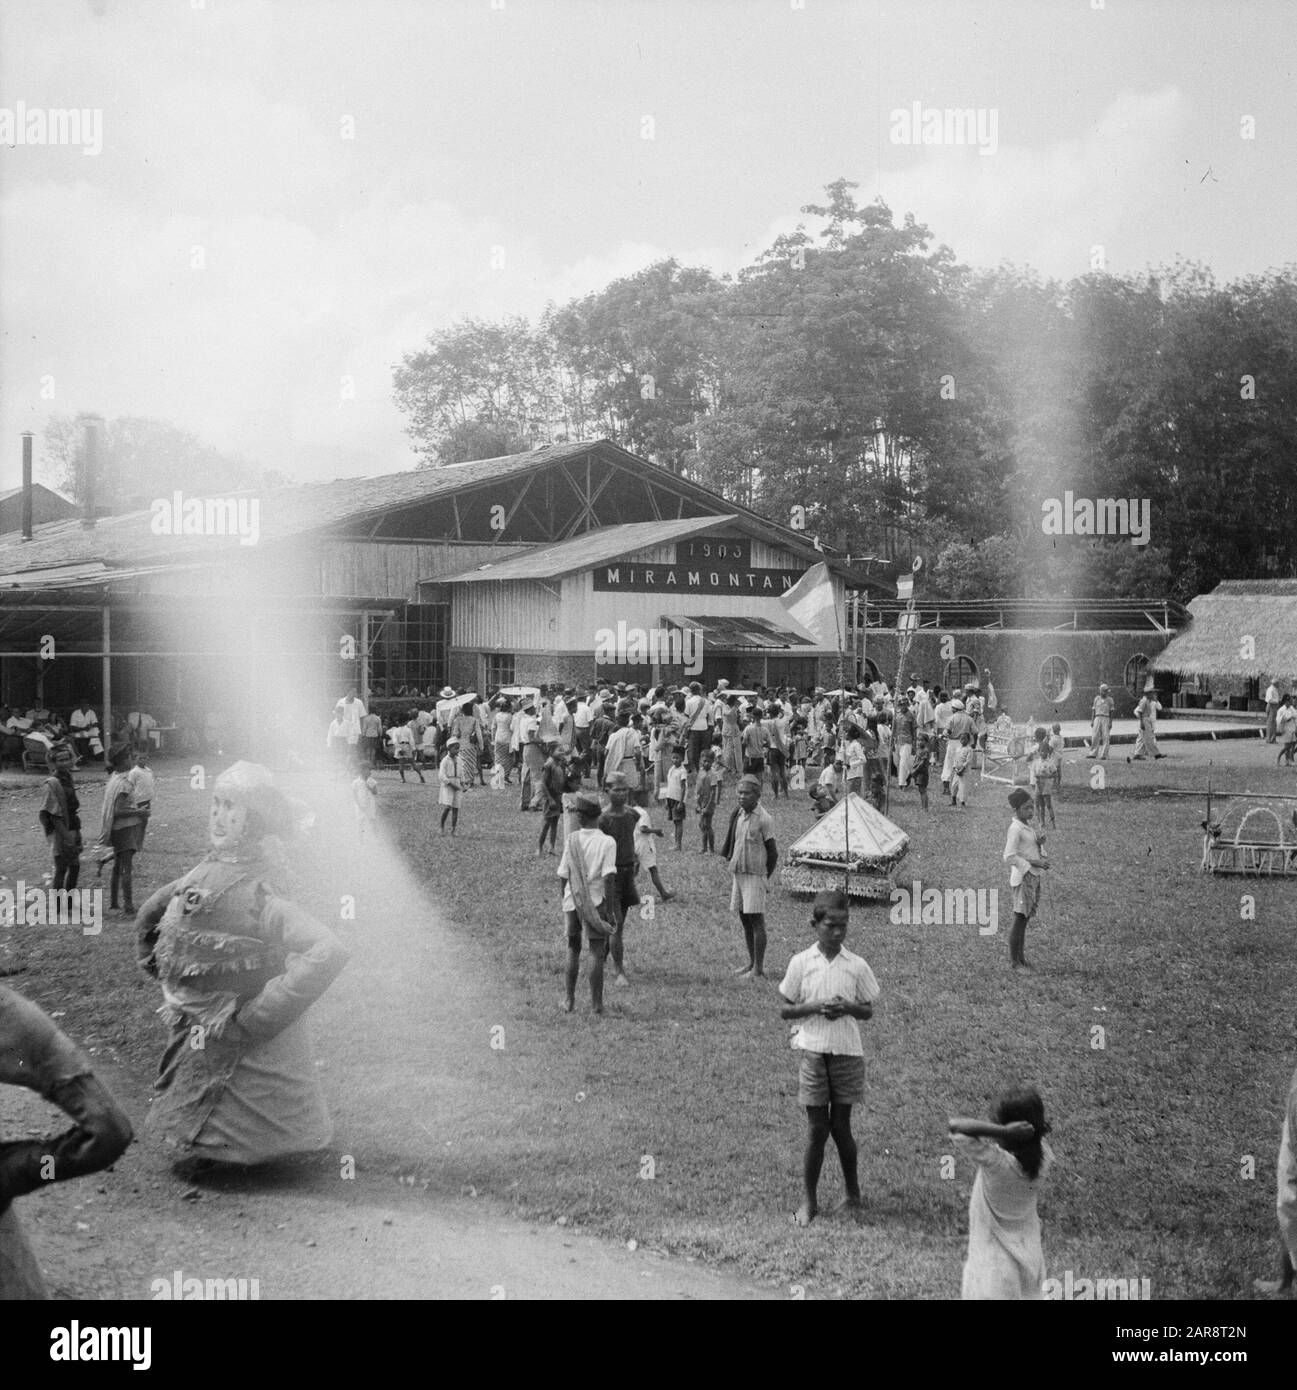 Articles lute. King (Wajang-Goleg dolls Tangerang)  [tea company Mira Montana at Depok] [party reopening?] Annotation: In the foreground ondel-ondel Betawi dolls Date: 25 November 1948 Location: Indonesia, Dutch East Indies Stock Photo